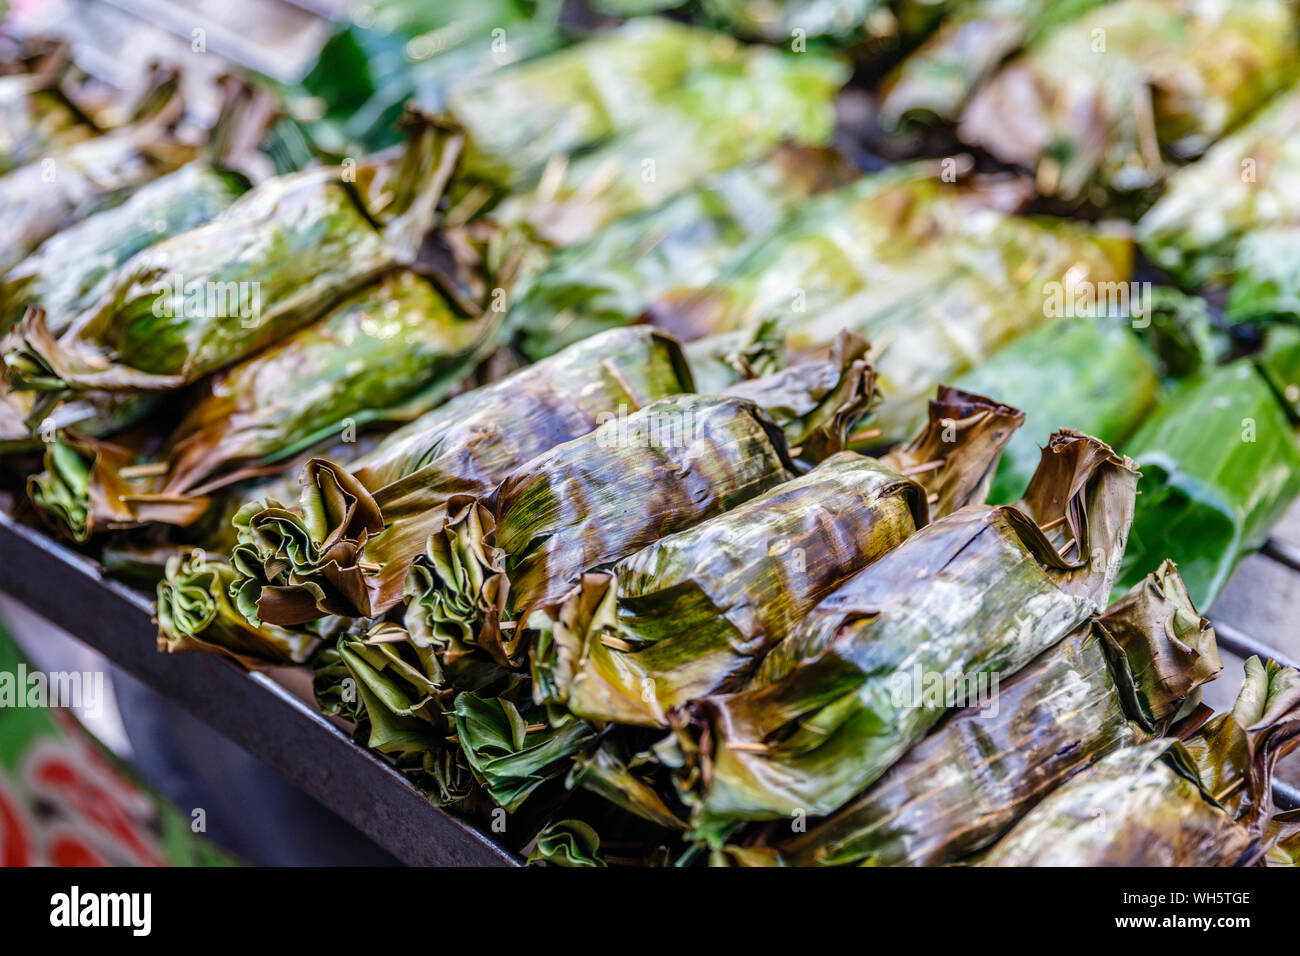 Grilled sticky rice with coconut milk and taro or banana wrapped in banana leaves. Thai street food, Thai traditional dessert. Bangkok, Thailand Stock Photo